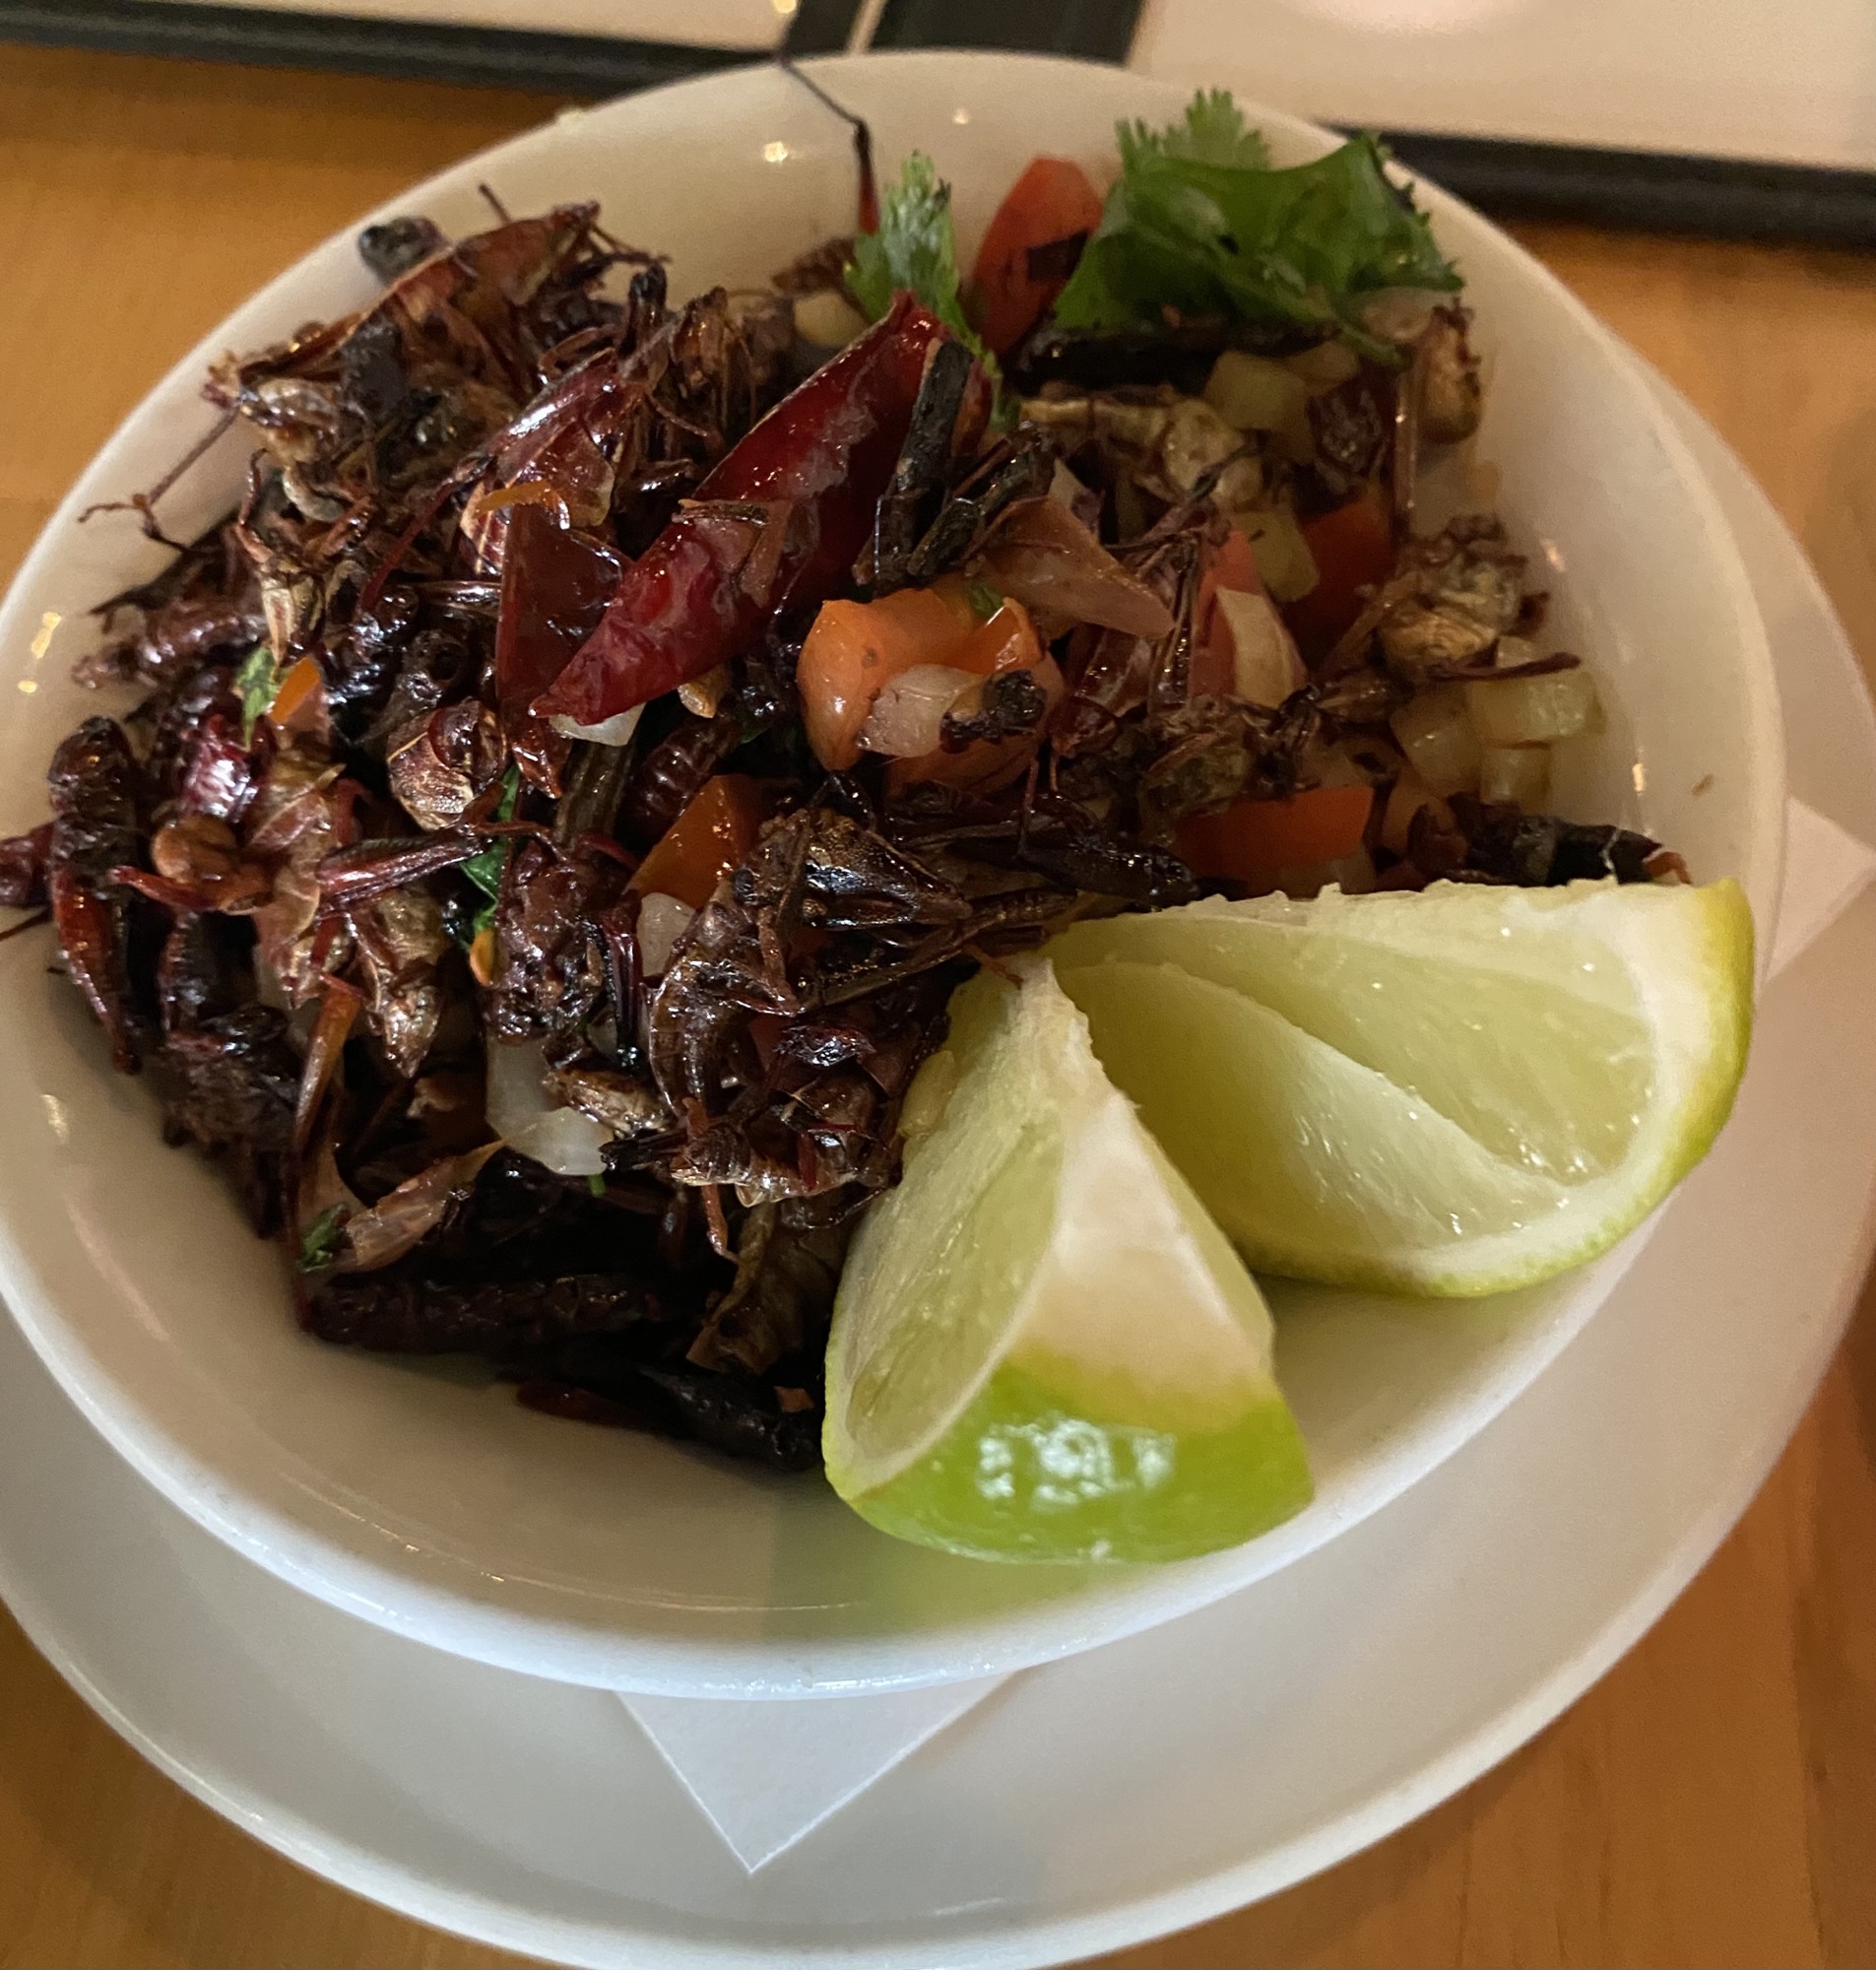 At Kie-Gol-Lanee, chapulines are a delicacy. (Sofia MacMaster)